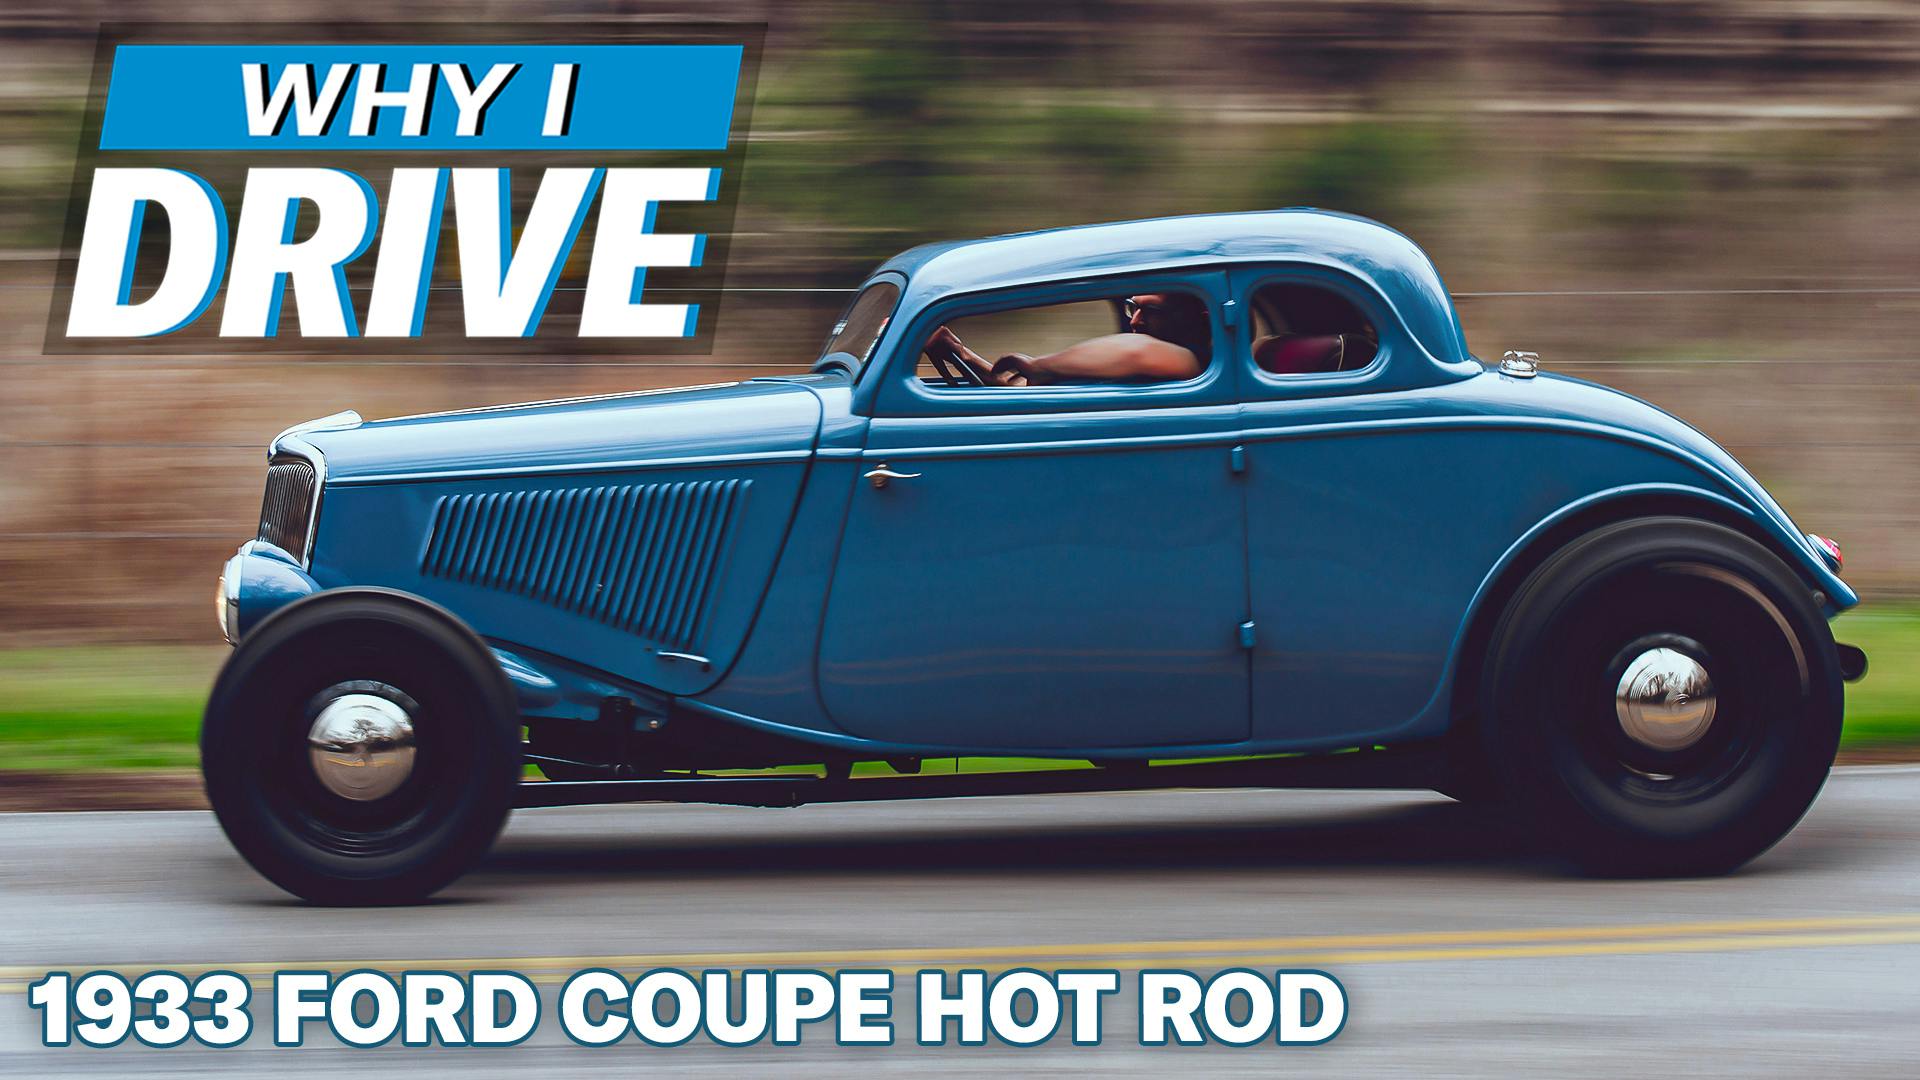 1933 Ford Coupe why i drive show lead